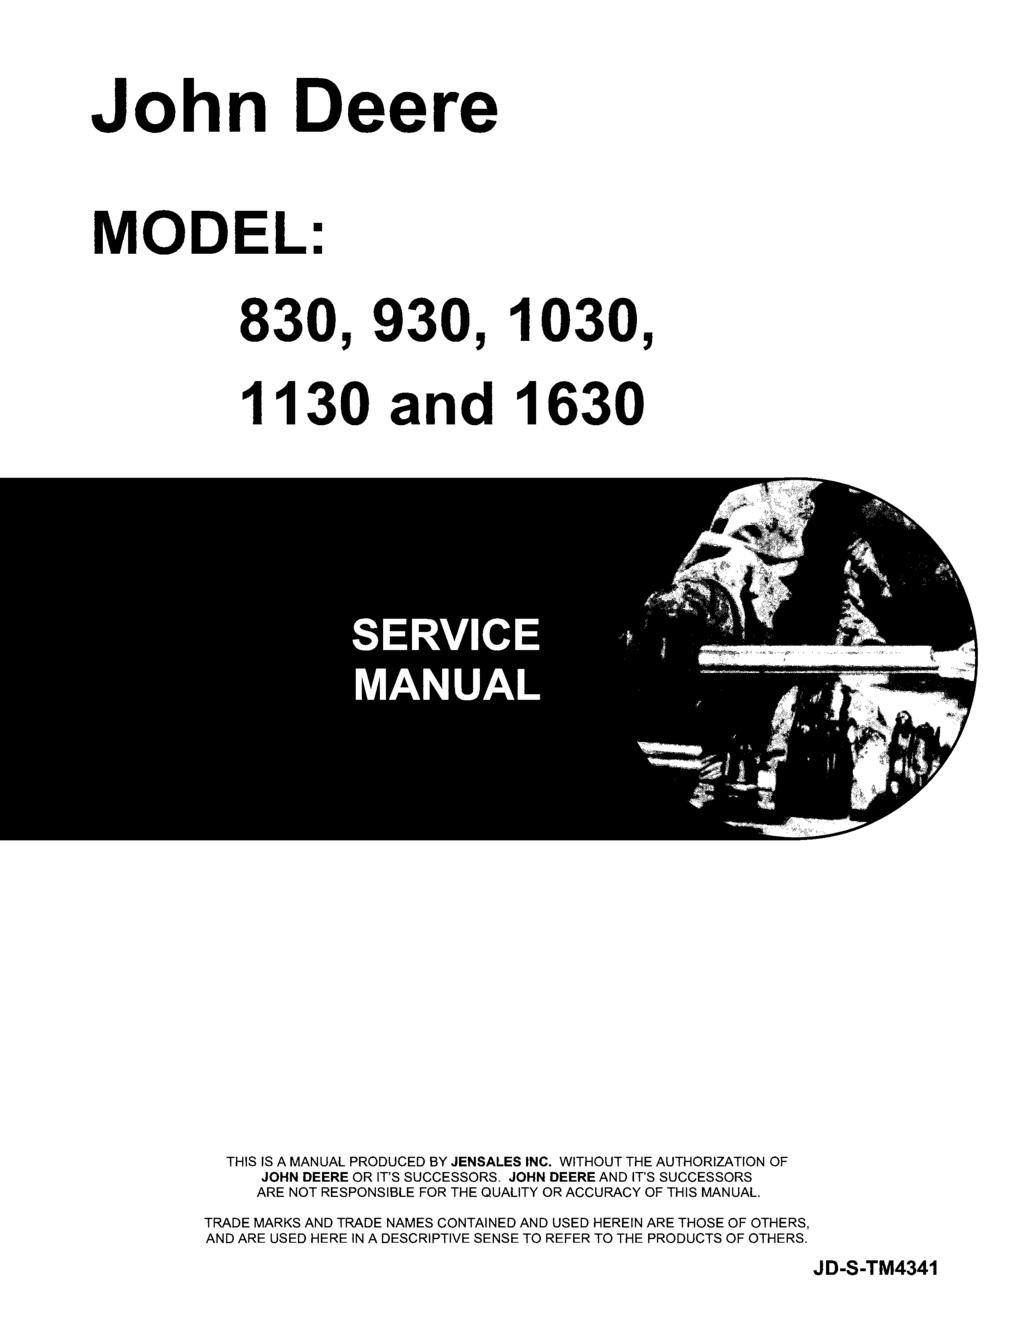 John Deere MODEL: 830, 930, 1030, 1130 and 1630 THIS IS A MANUAL PRODUCED BY JENSALES INC. WITHOUT THE AUTHORIZATION OF JOHN DEERE OR IT'S SUCCESSORS.